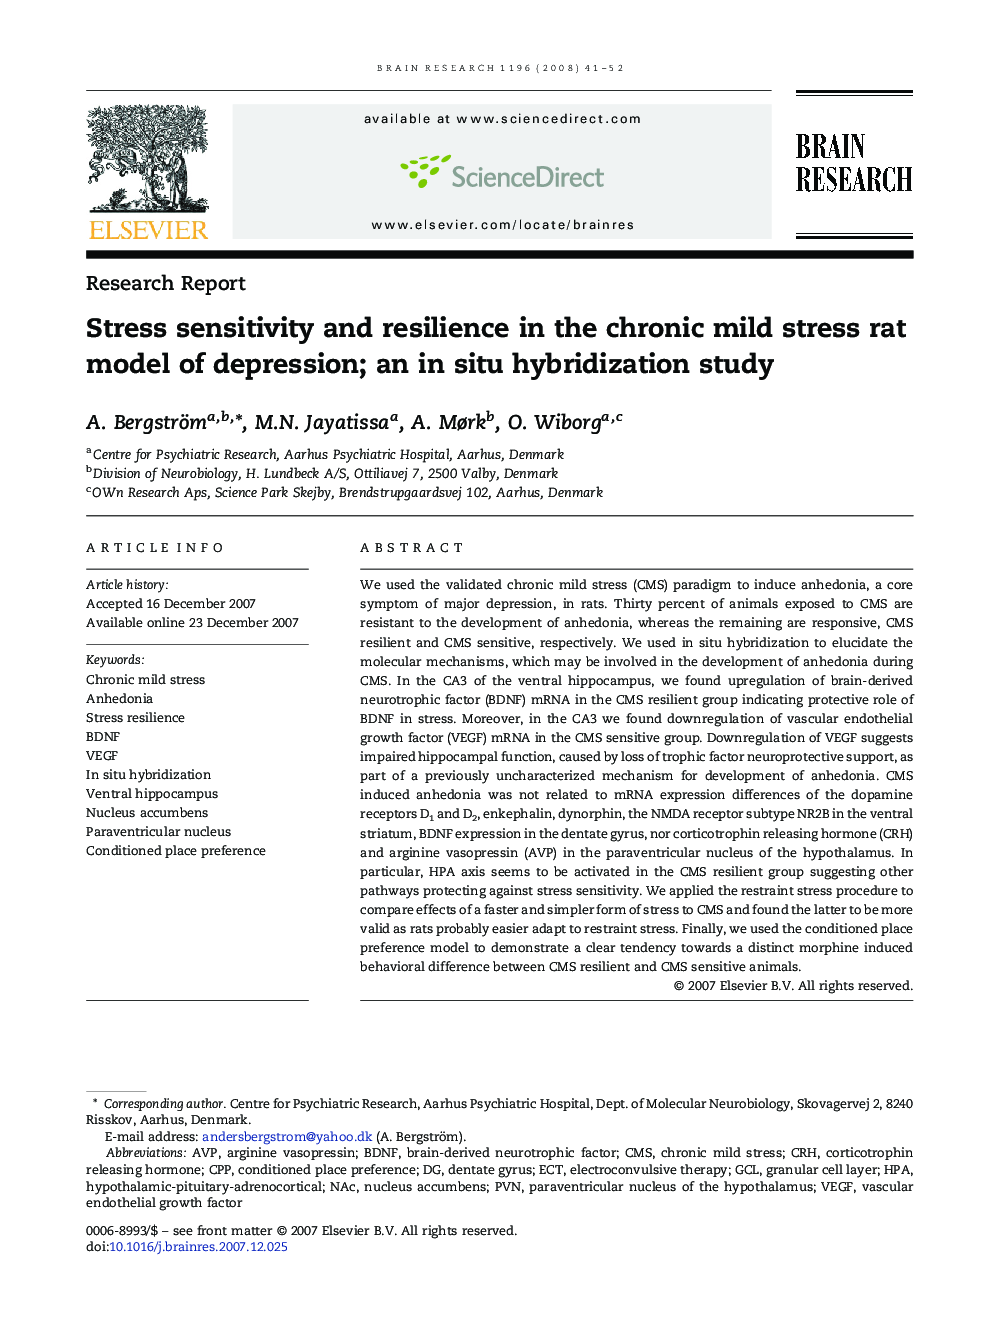 Stress sensitivity and resilience in the chronic mild stress rat model of depression; an in situ hybridization study